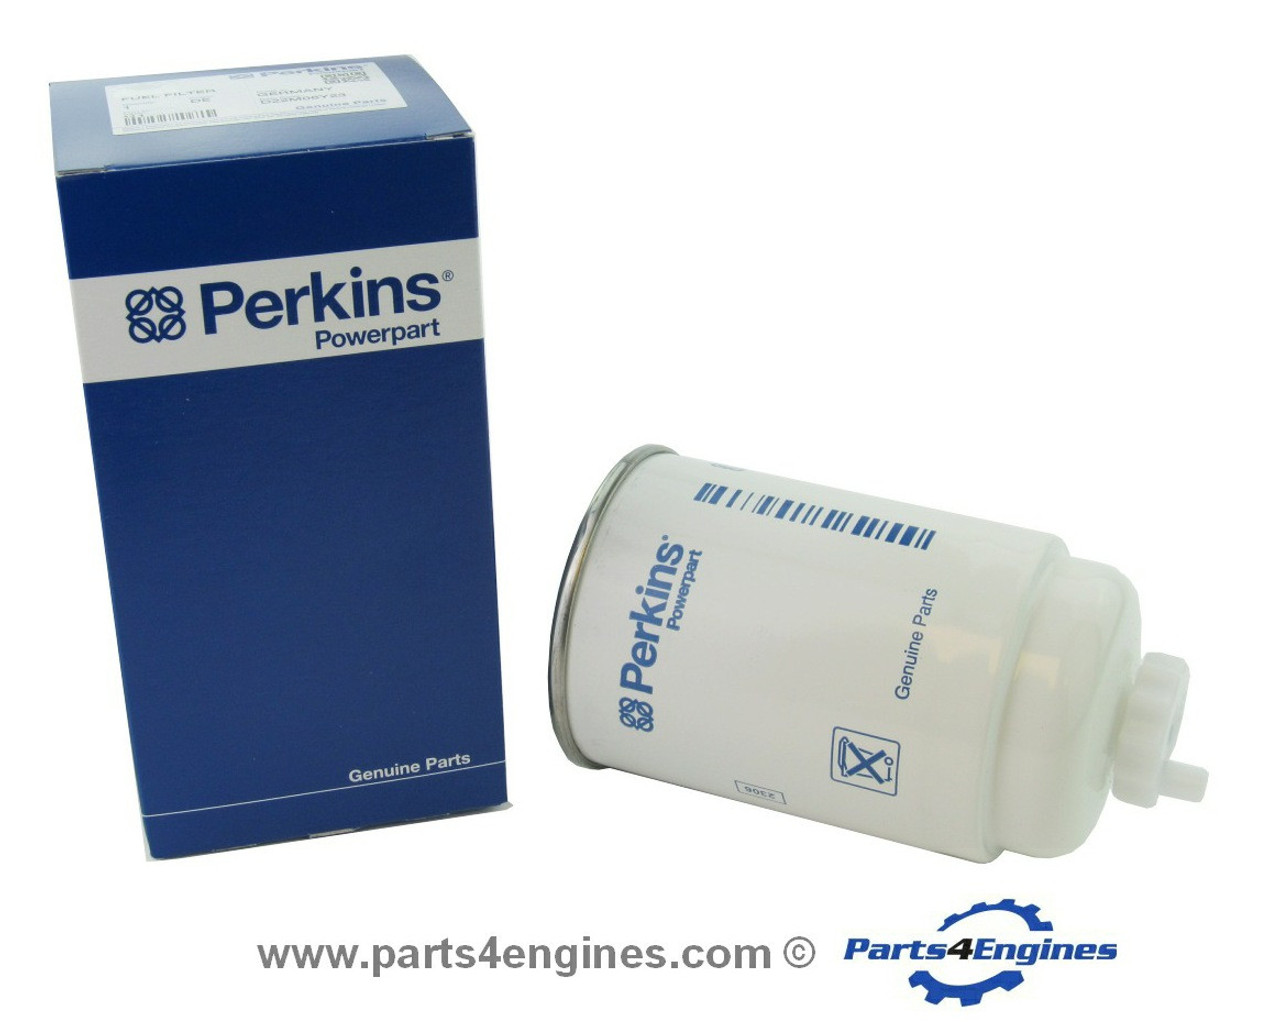 Volvo Penta MD22 Main Fuel Filter,  from Parts4Engines.com